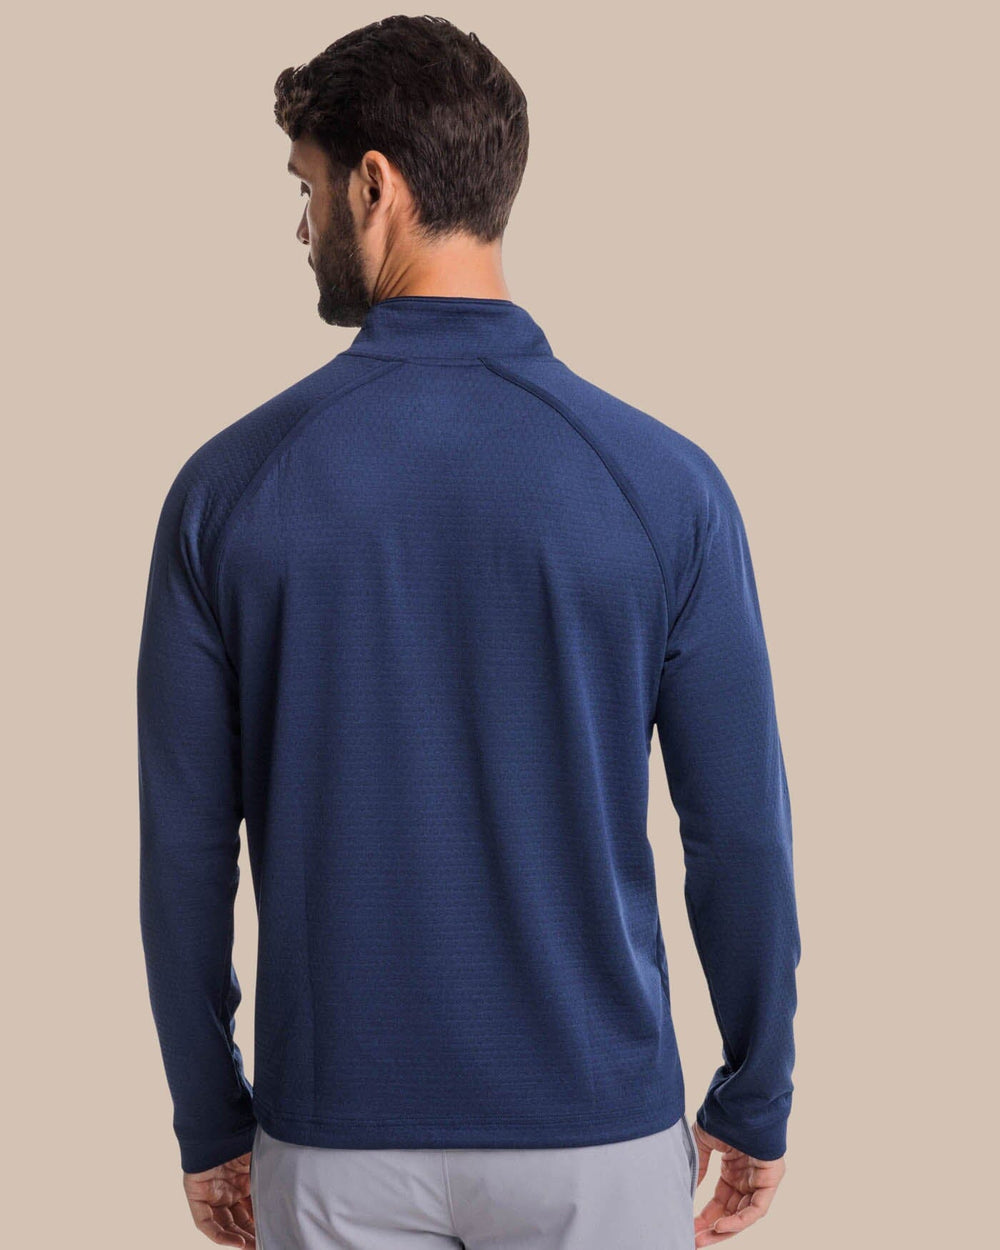 The back view of the Southern Tide Scuttle Heather Quarter Zip Pullover by Southern Tide - Heather True Navy